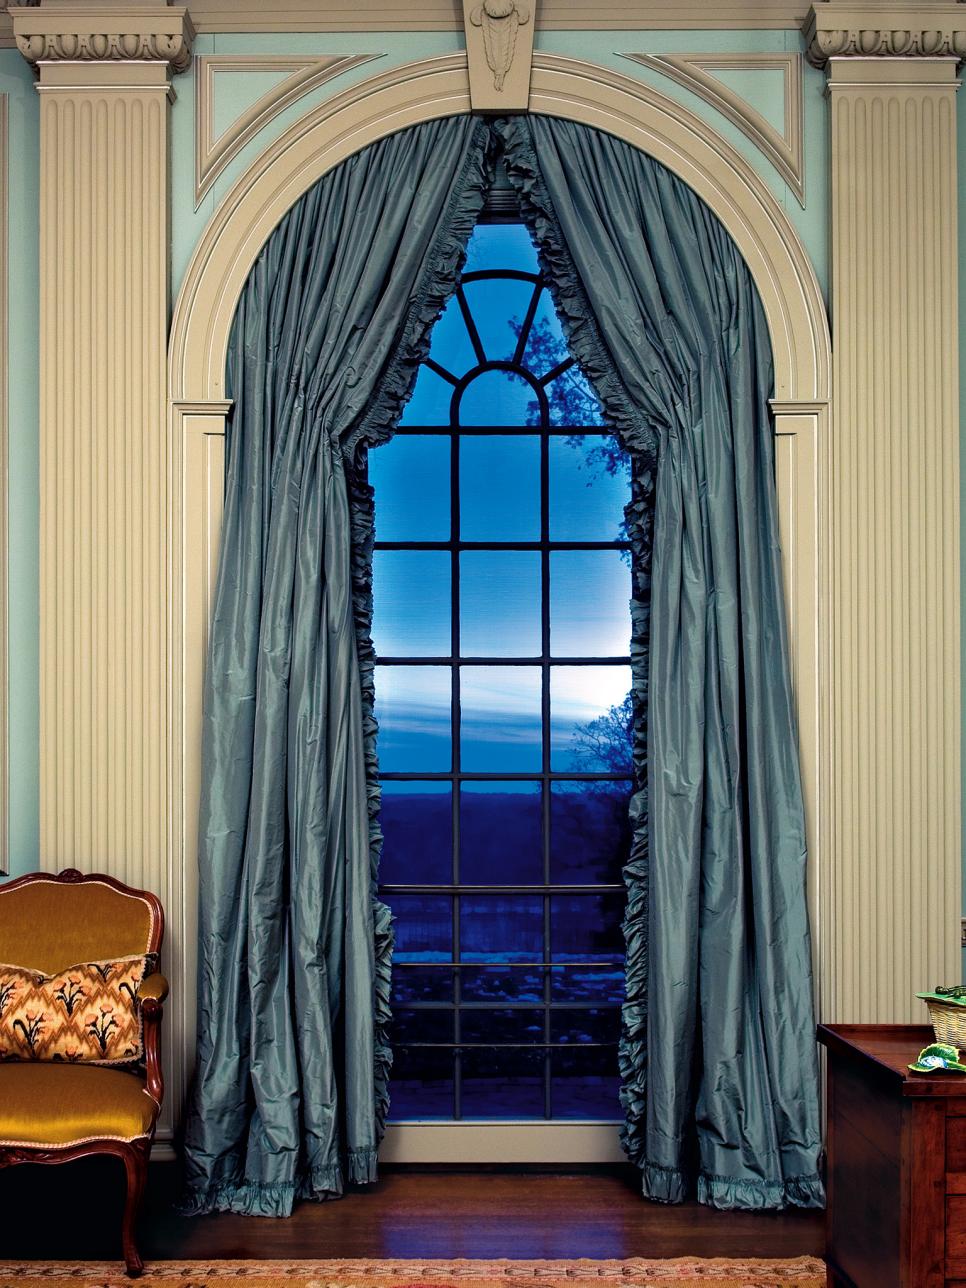 White and Blue Arched Window